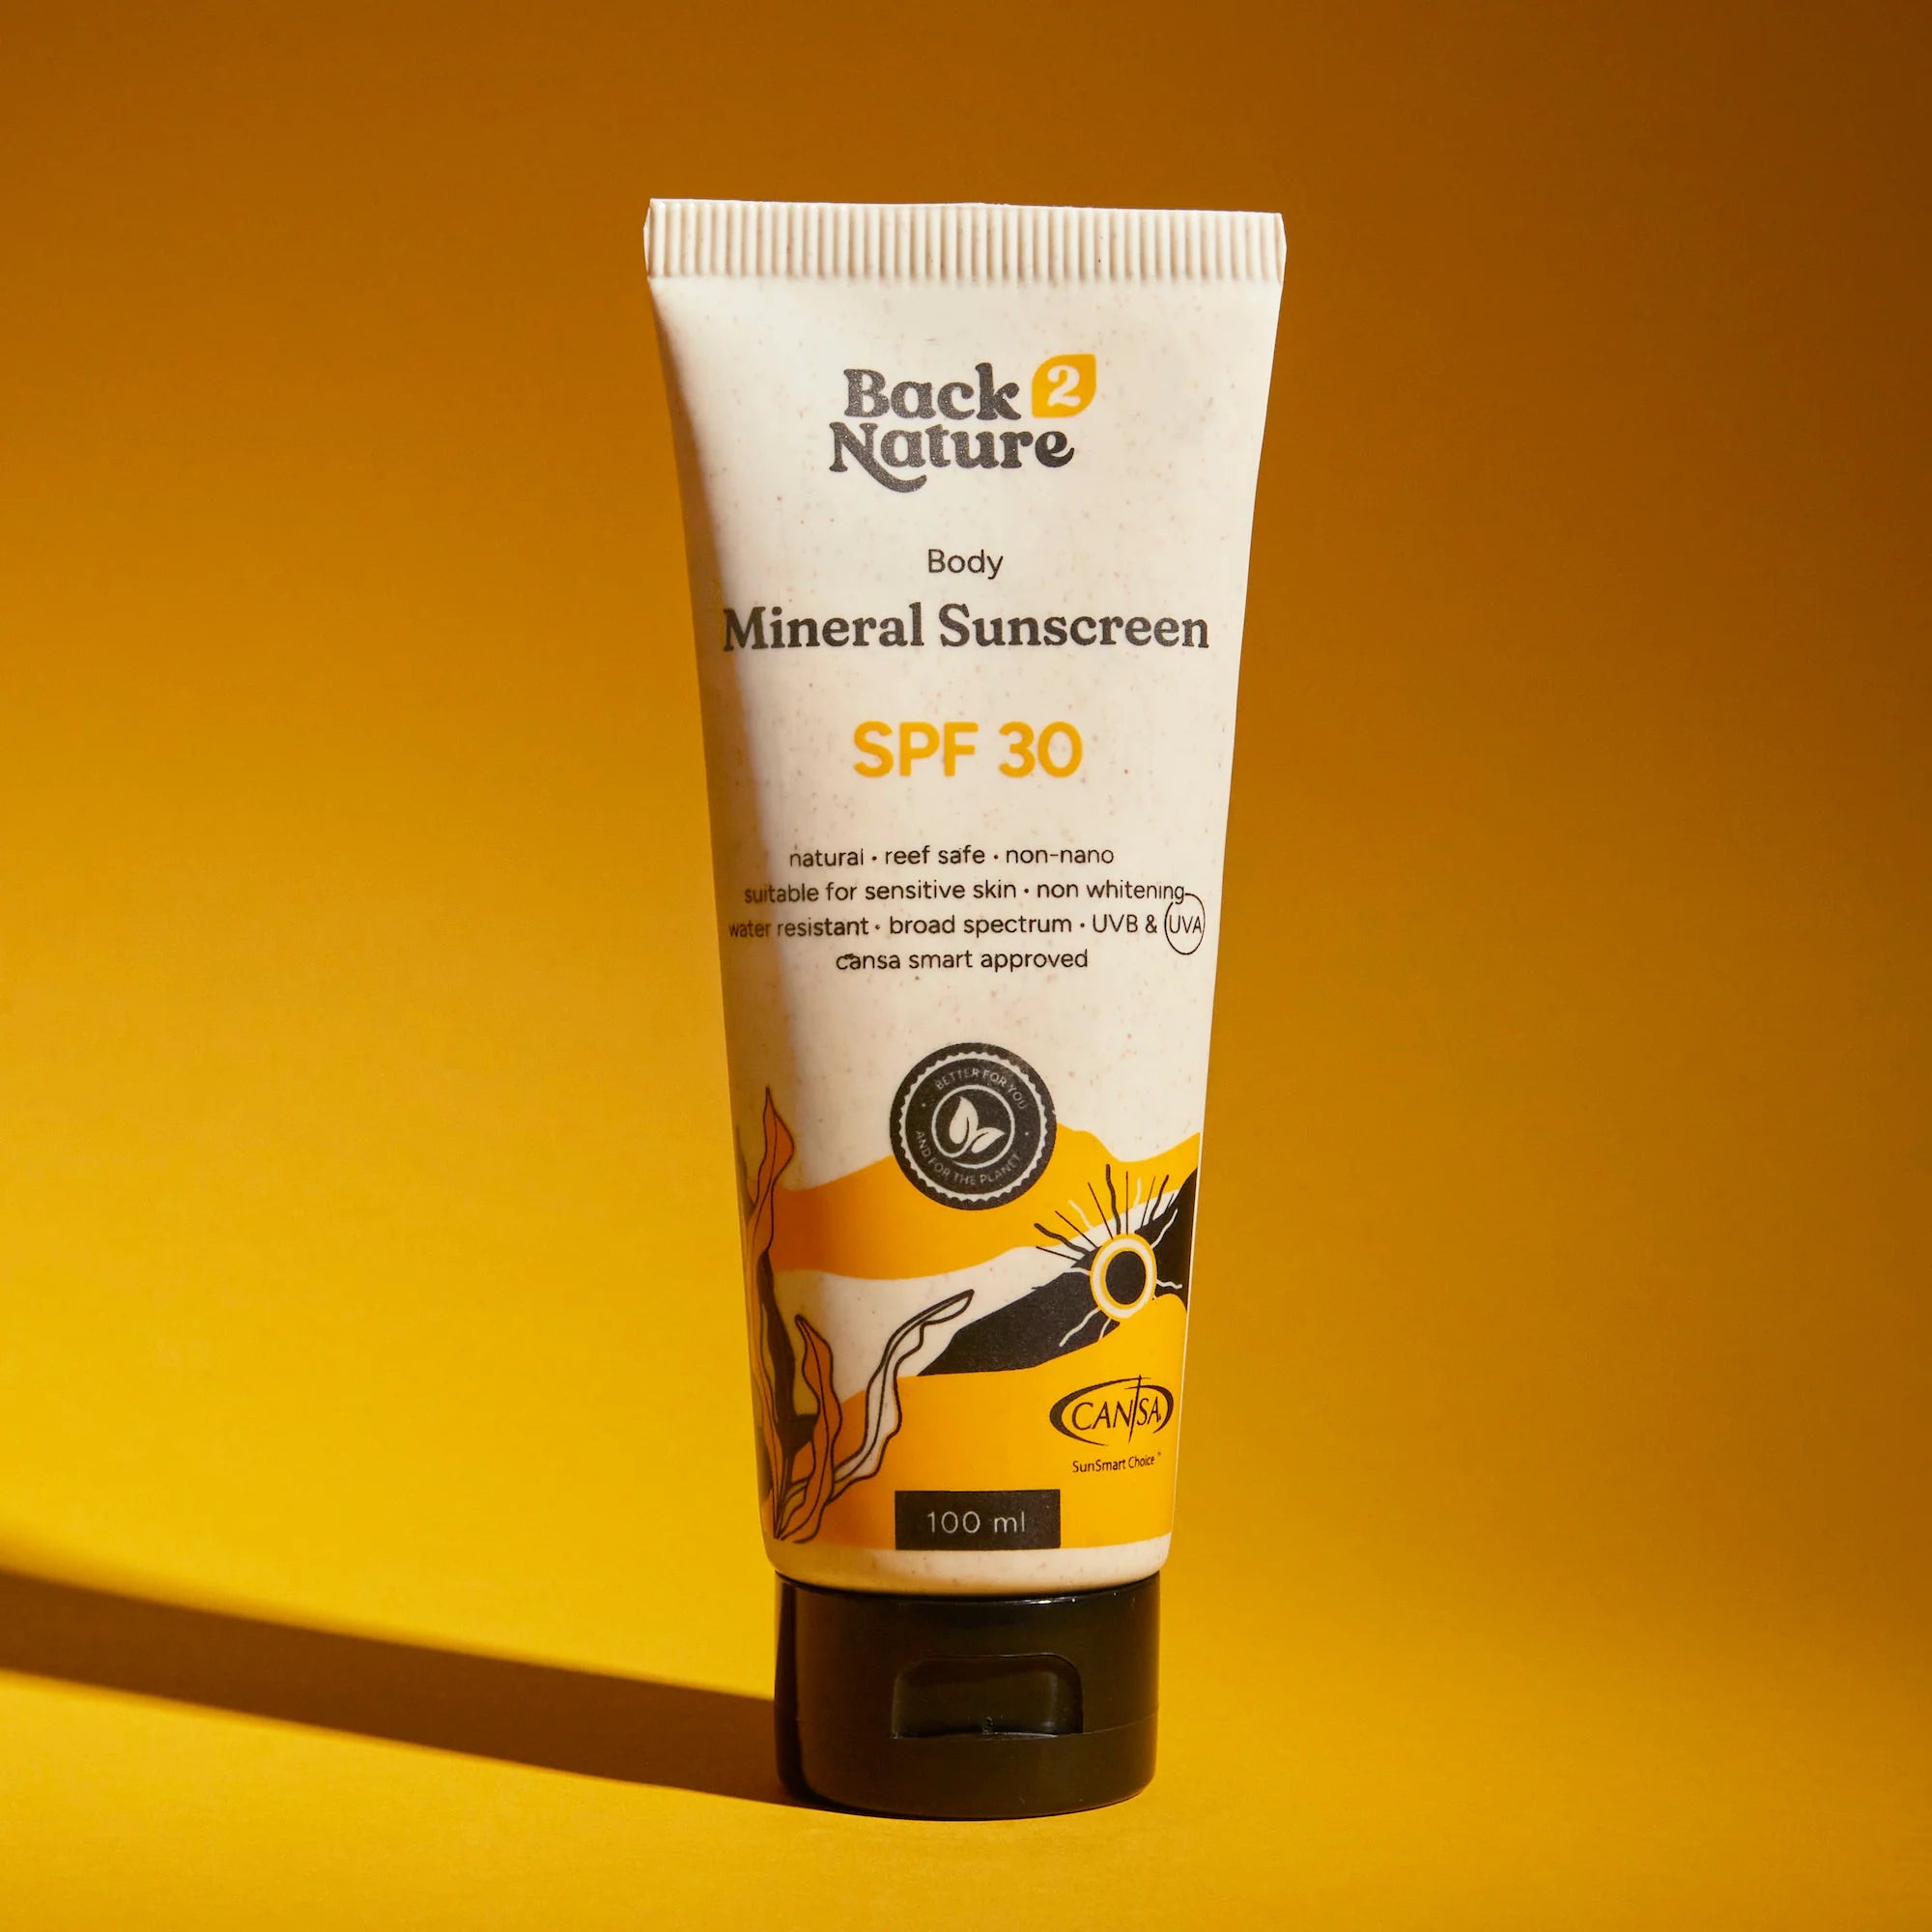 Back 2 Nature Mineral Sunscreen SPF30 100ml